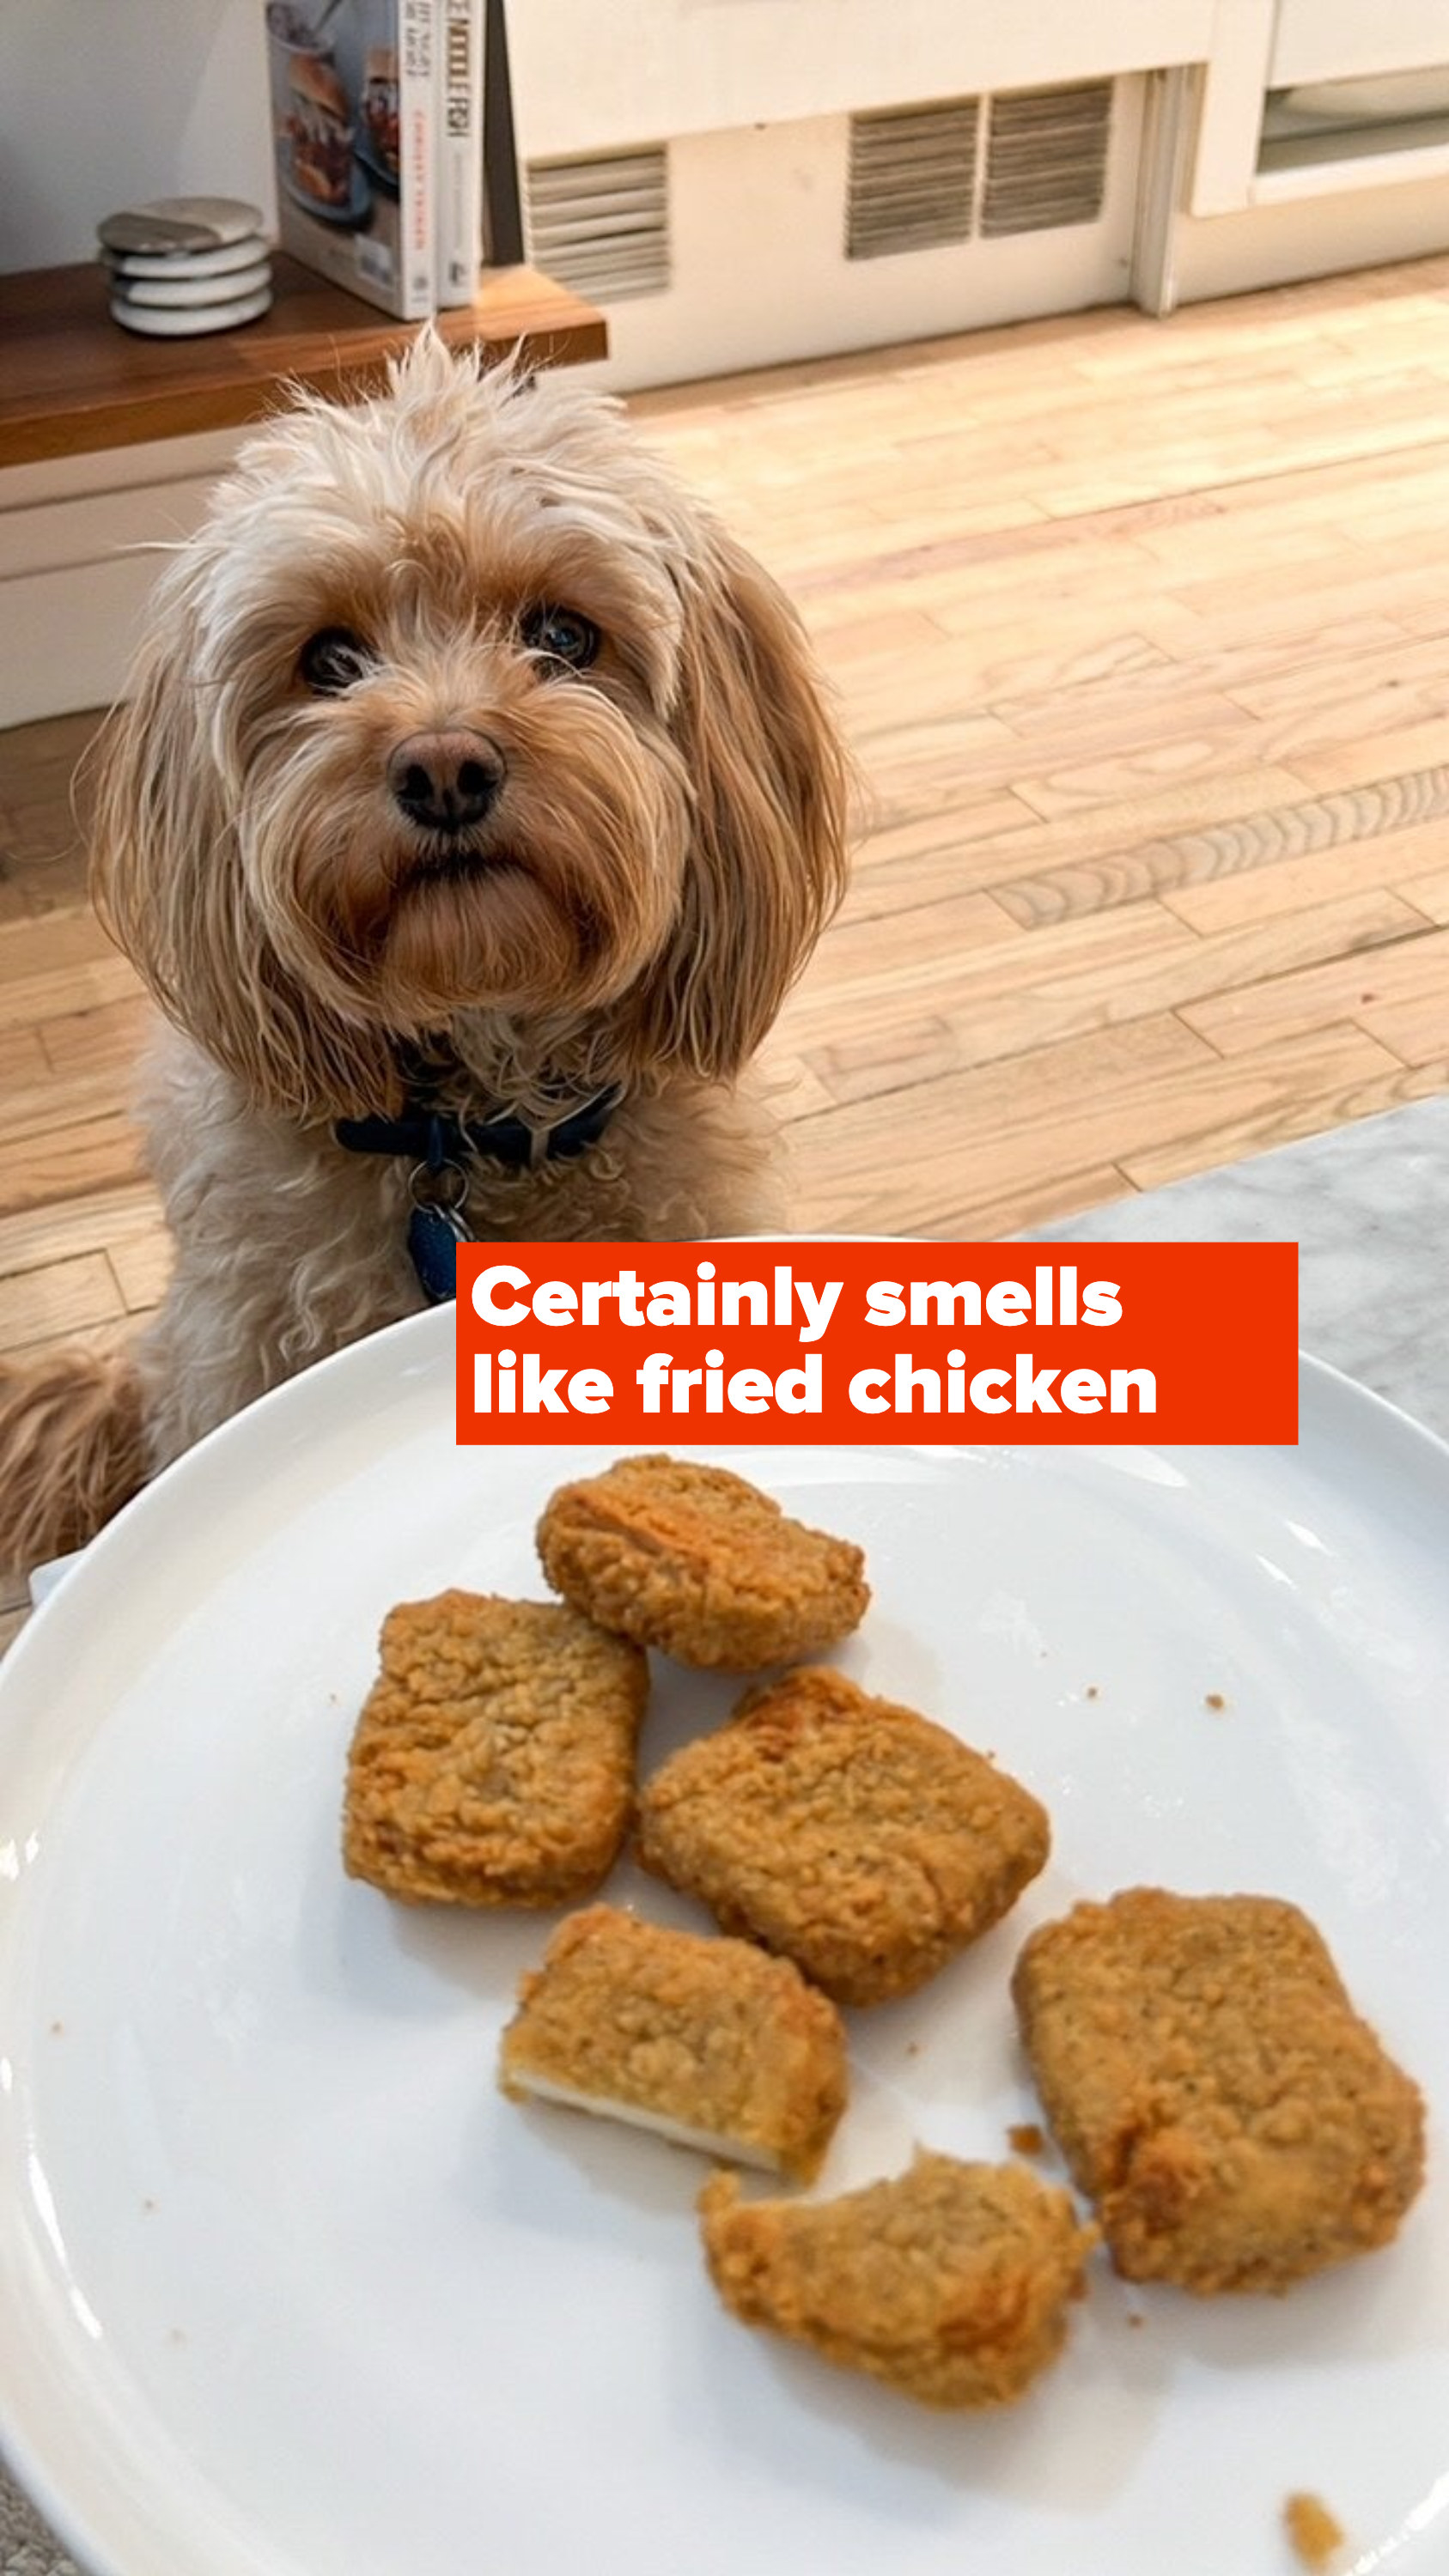 A dog looking at a plate of nuggets.